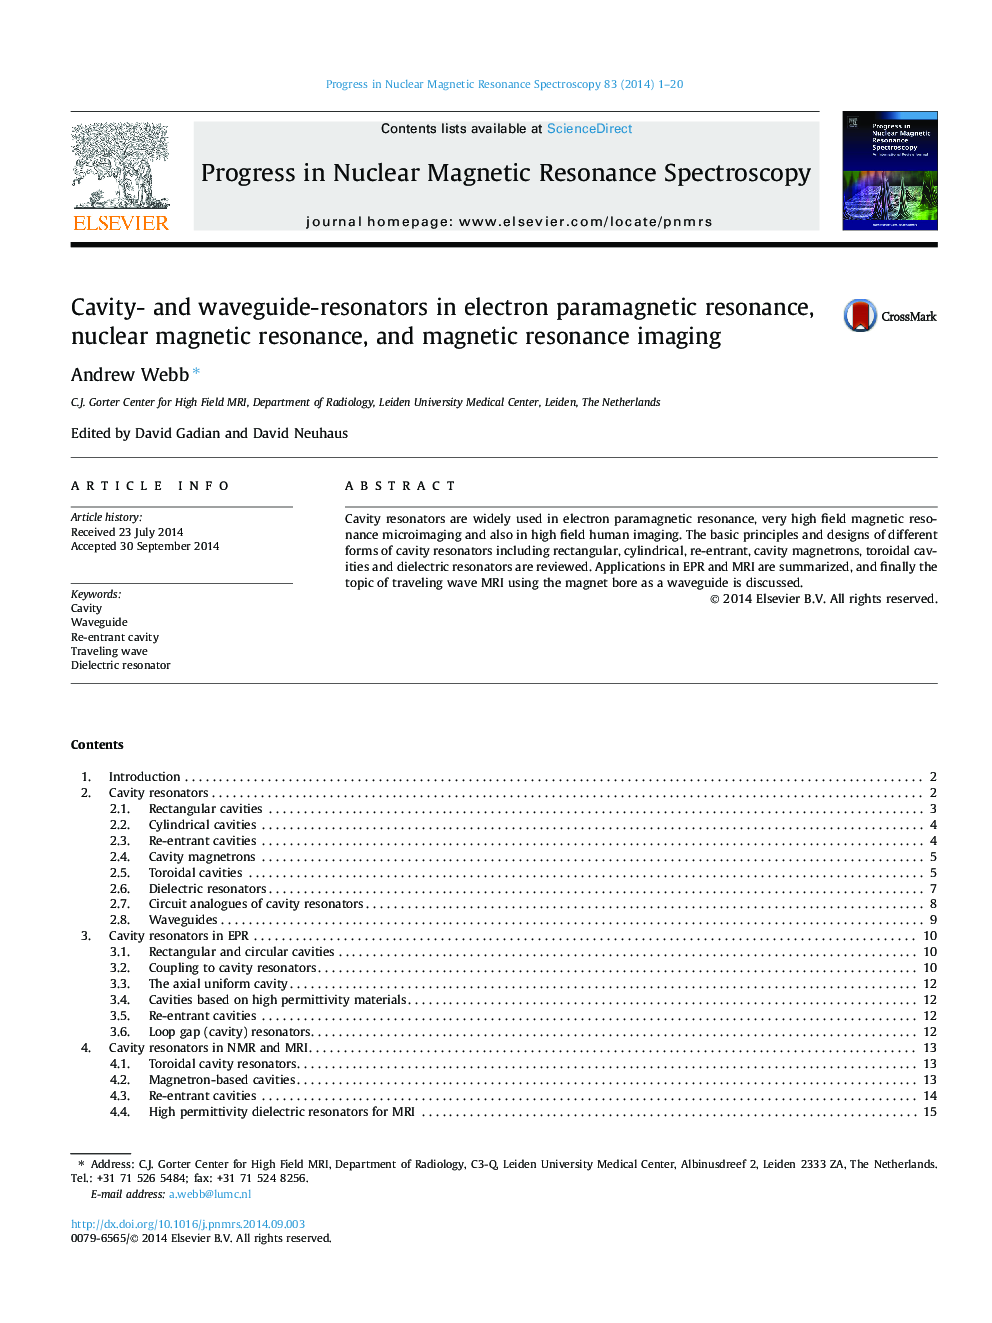 Cavity- and waveguide-resonators in electron paramagnetic resonance, nuclear magnetic resonance, and magnetic resonance imaging